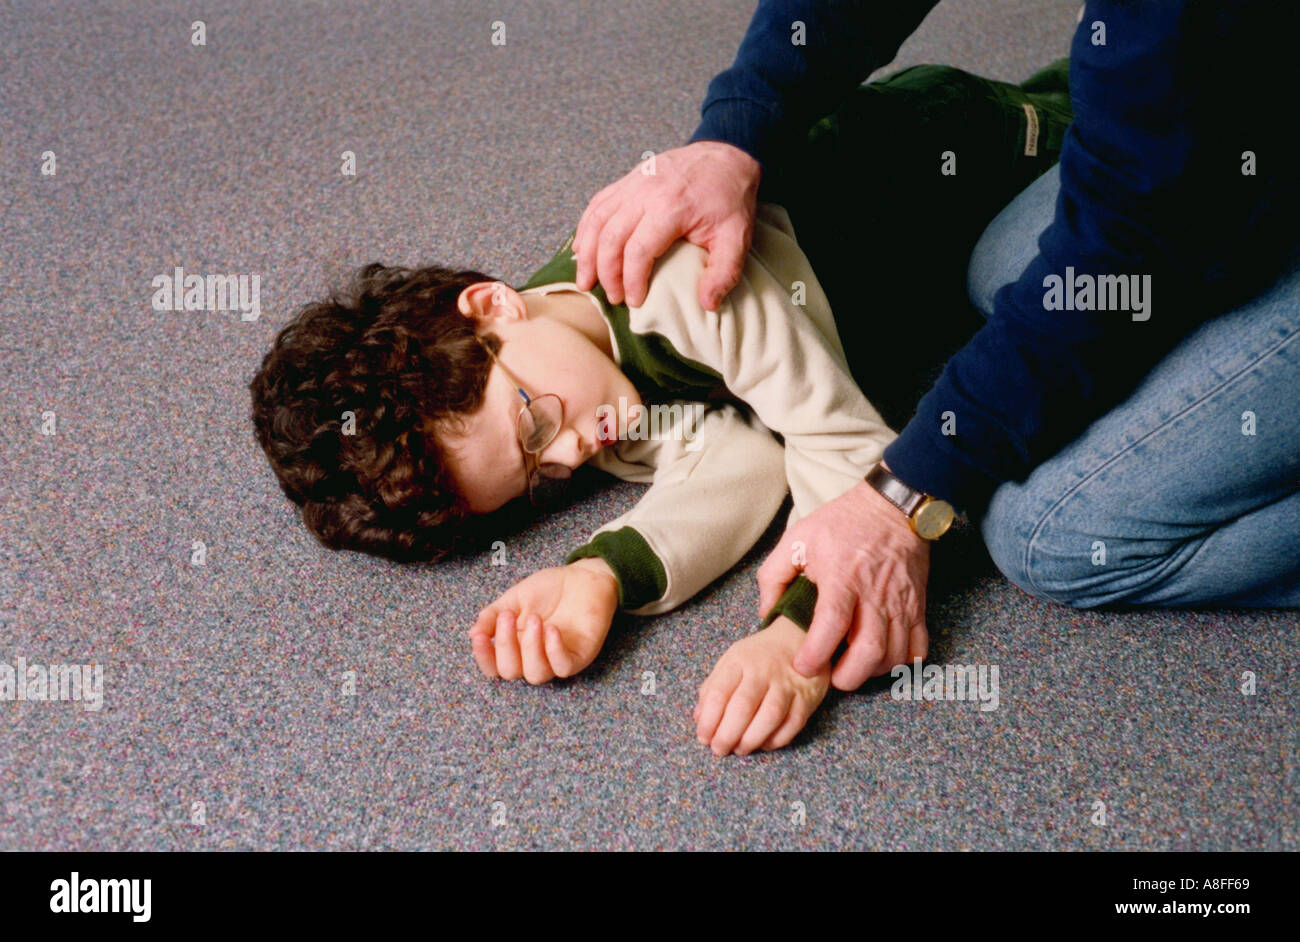 Child resuscitation recovery position Stock Photo